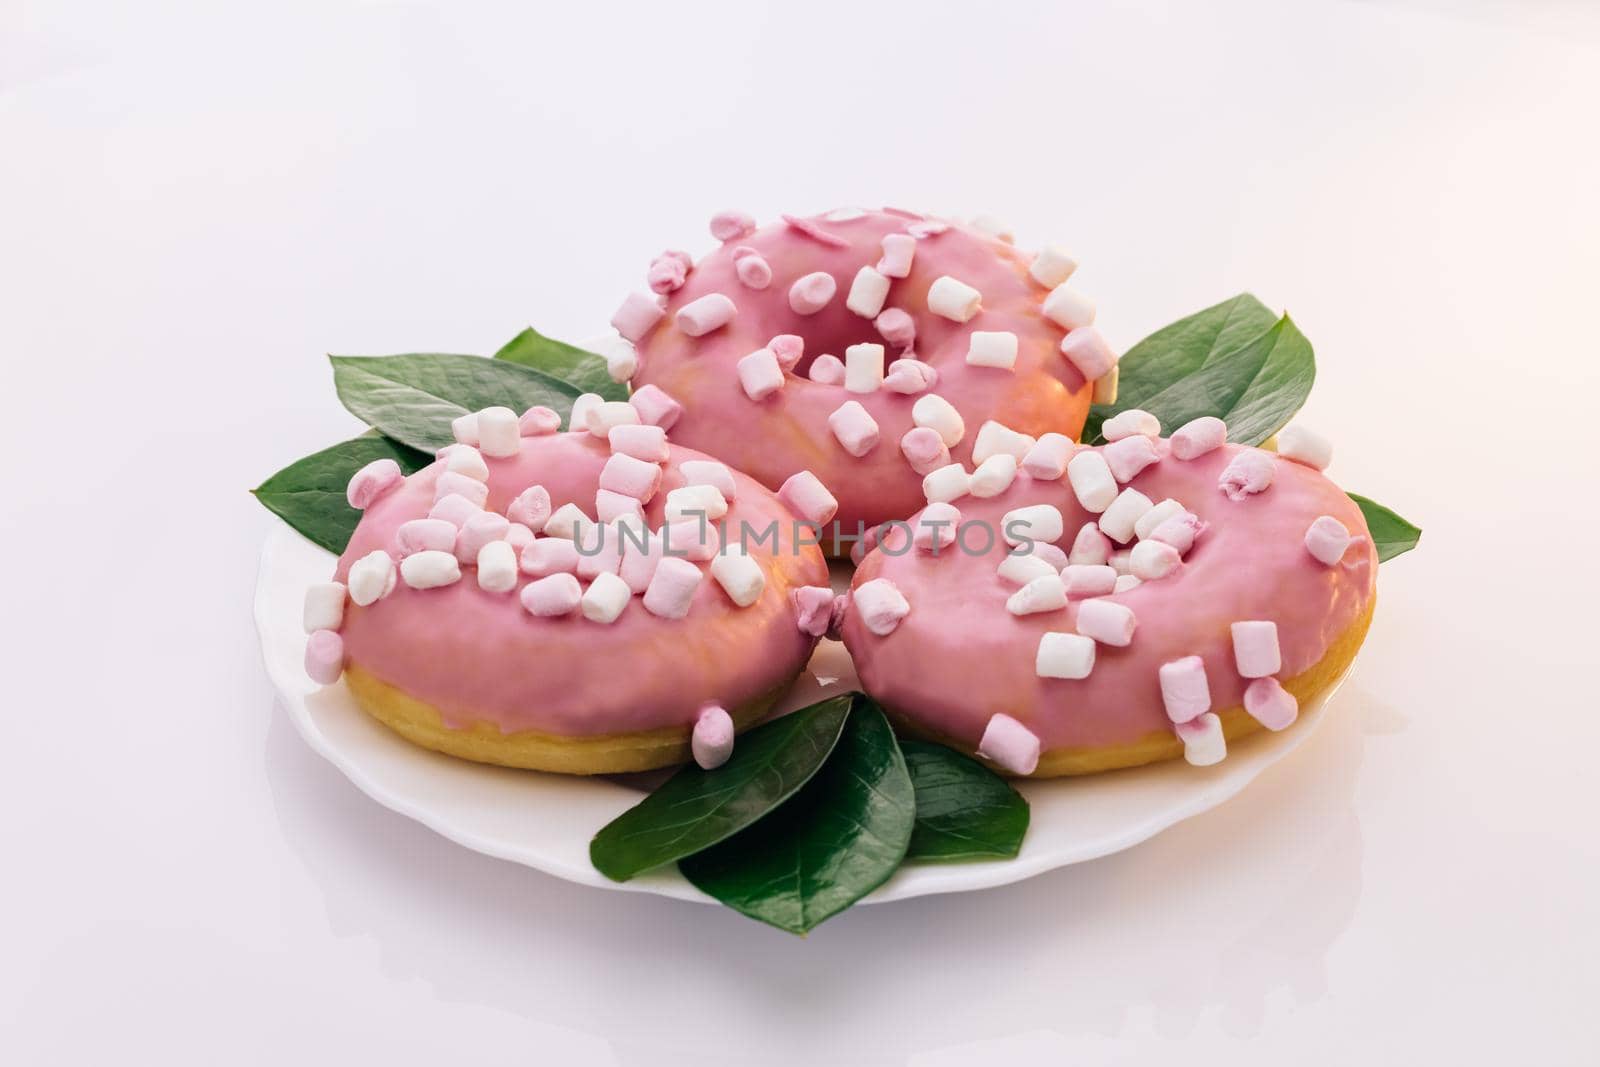 Colorful frosted pink doughnut. Assorted donuts. Pink glazed and sprinkles donuts. Rotating shot of white tasty delicious sweet donut with colorful sprinkles on white background. Dessert.